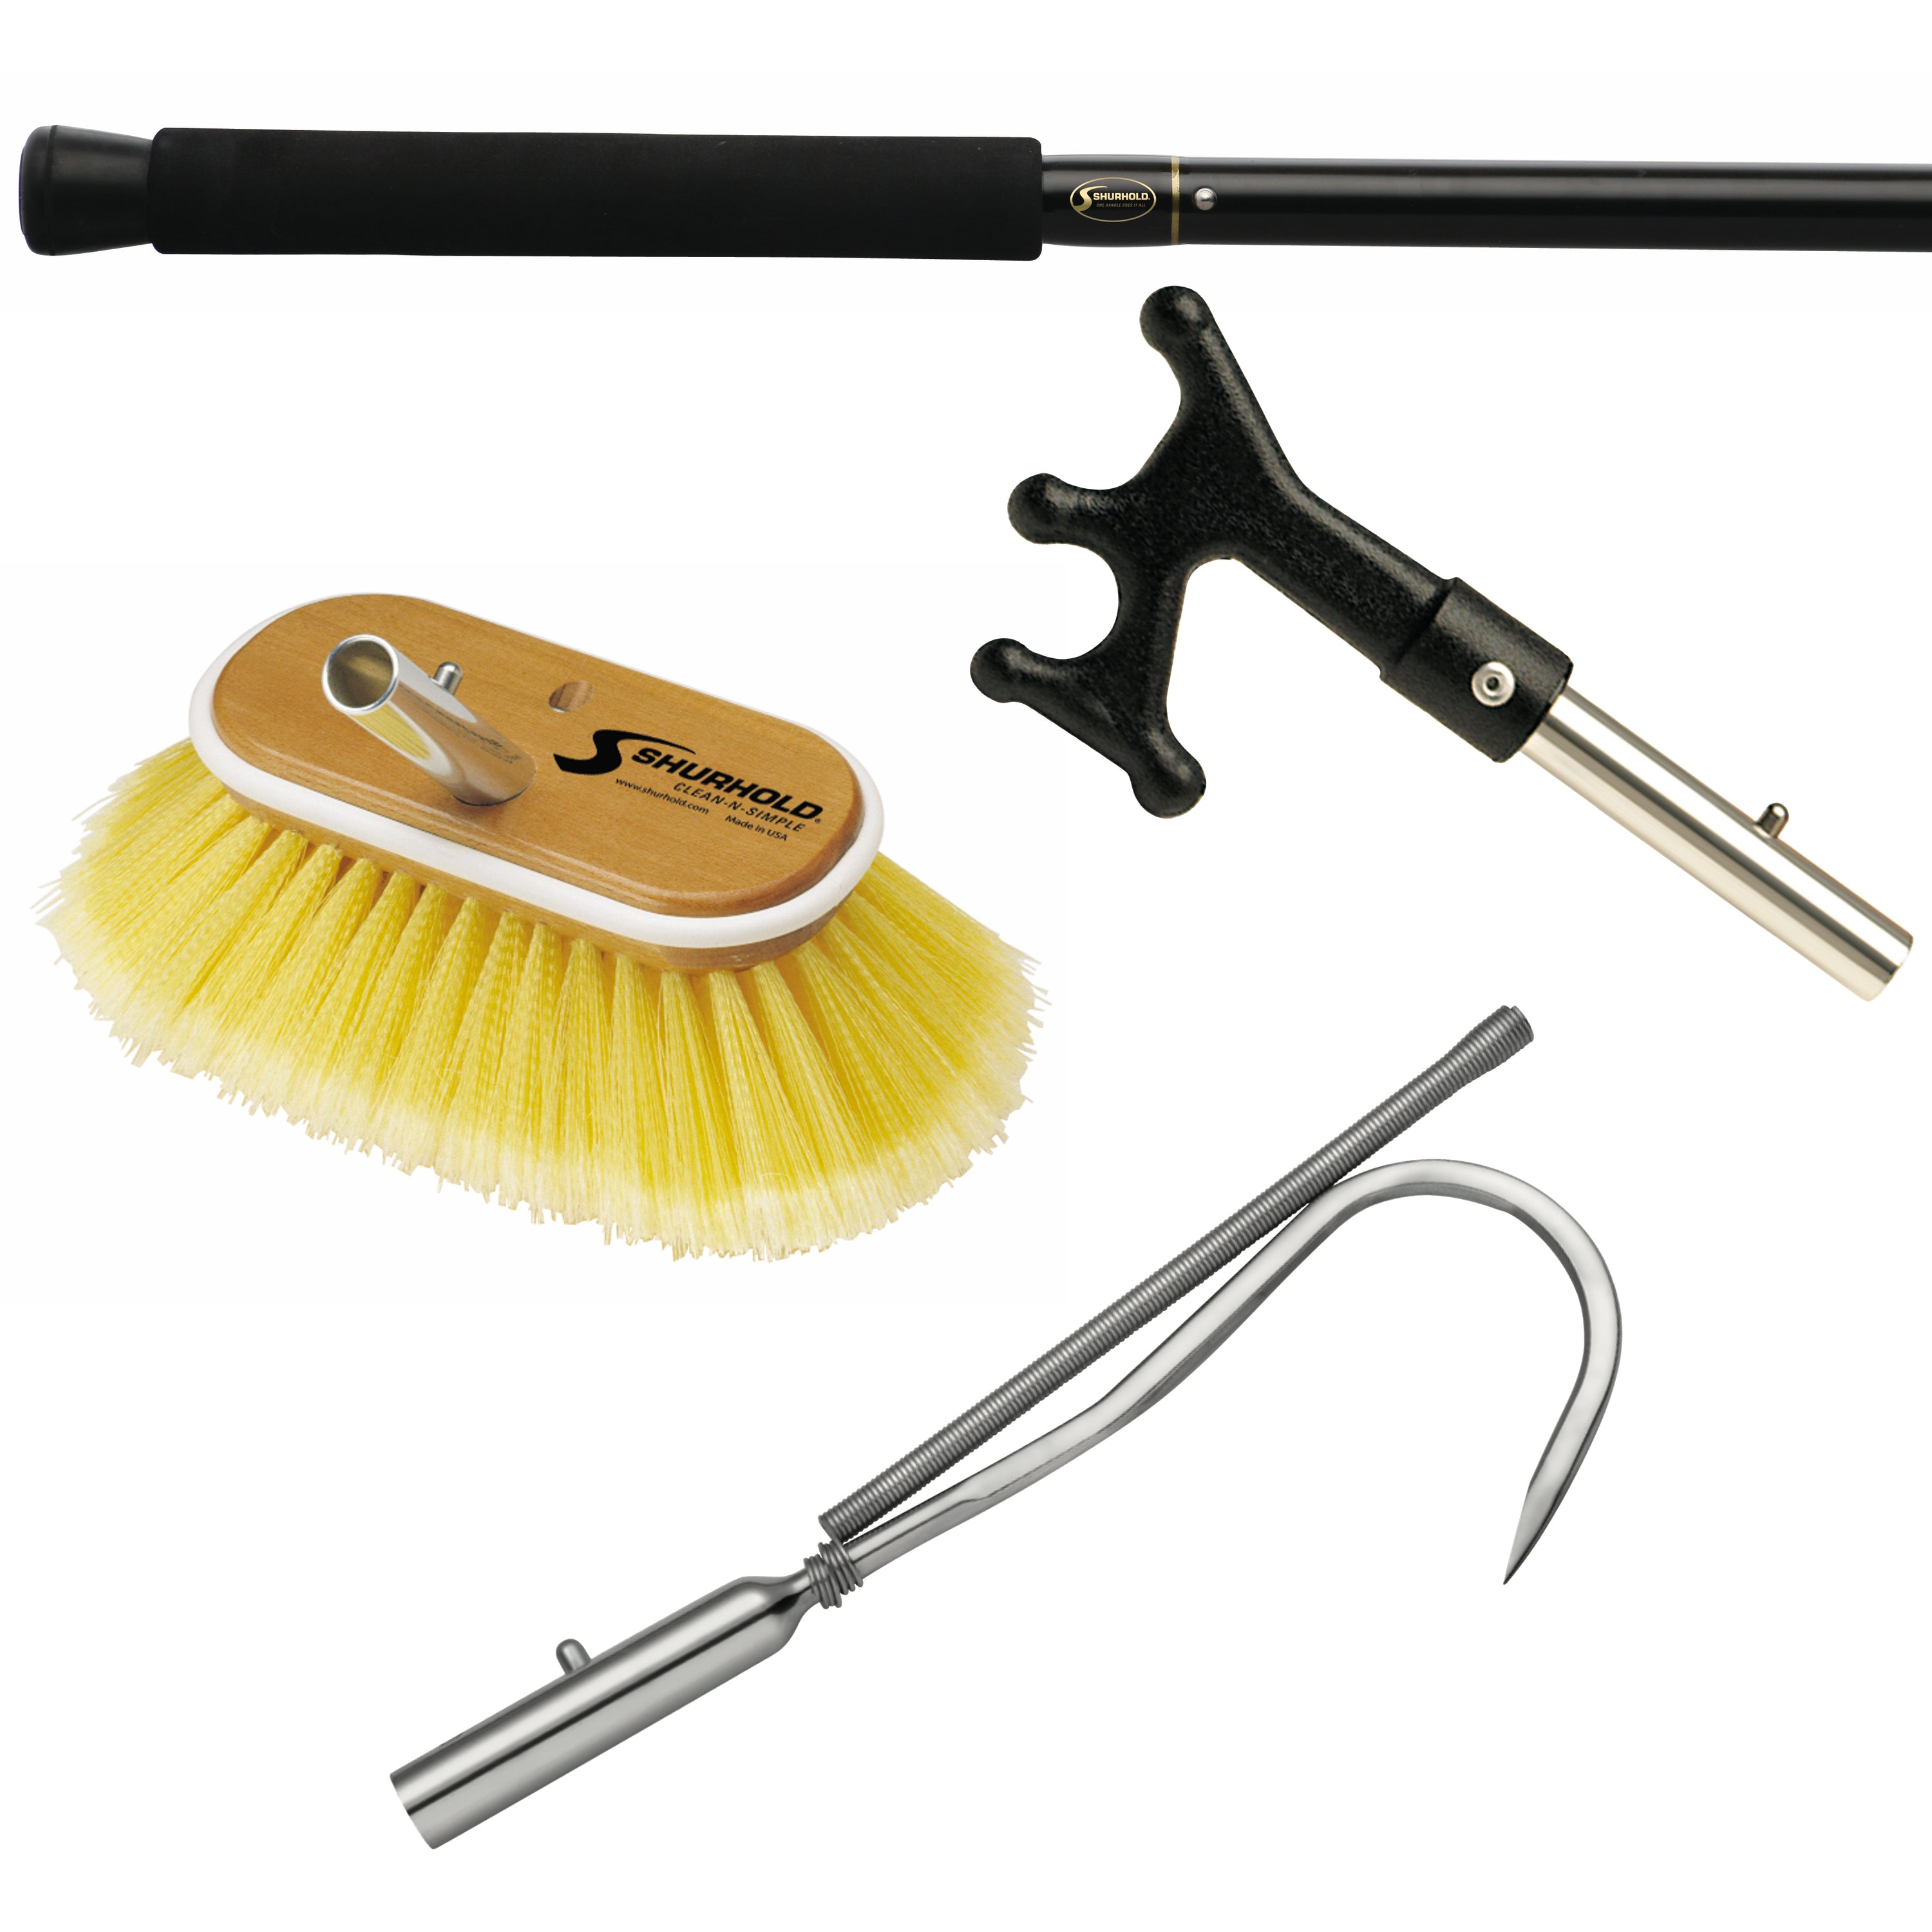 Proper Use of a Fishing Gaff and which Type to Use - Shurhold Industries,  Inc.